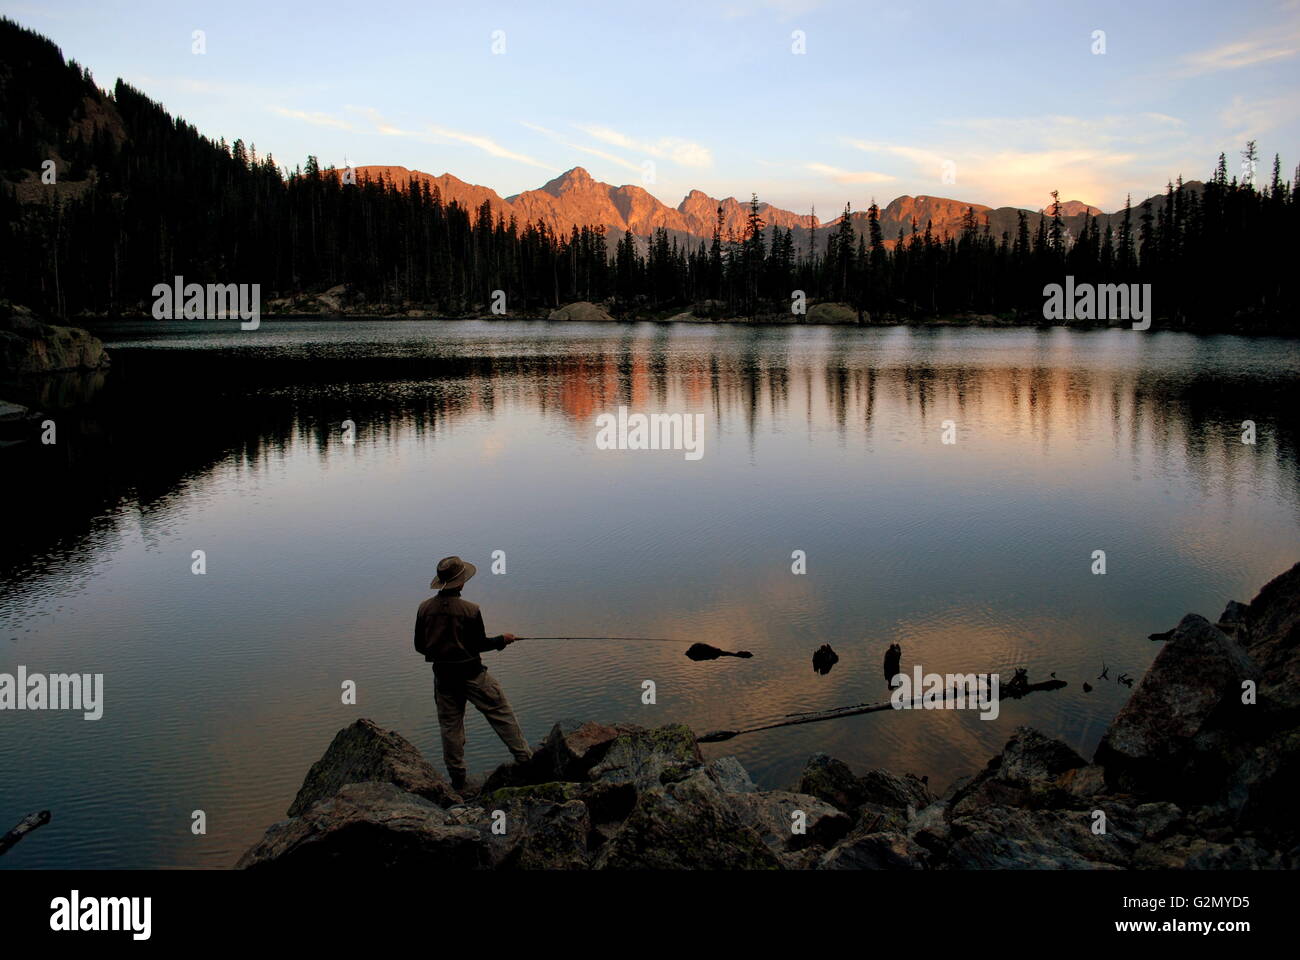 Fly fishing on a lake at sunset Stock Photo